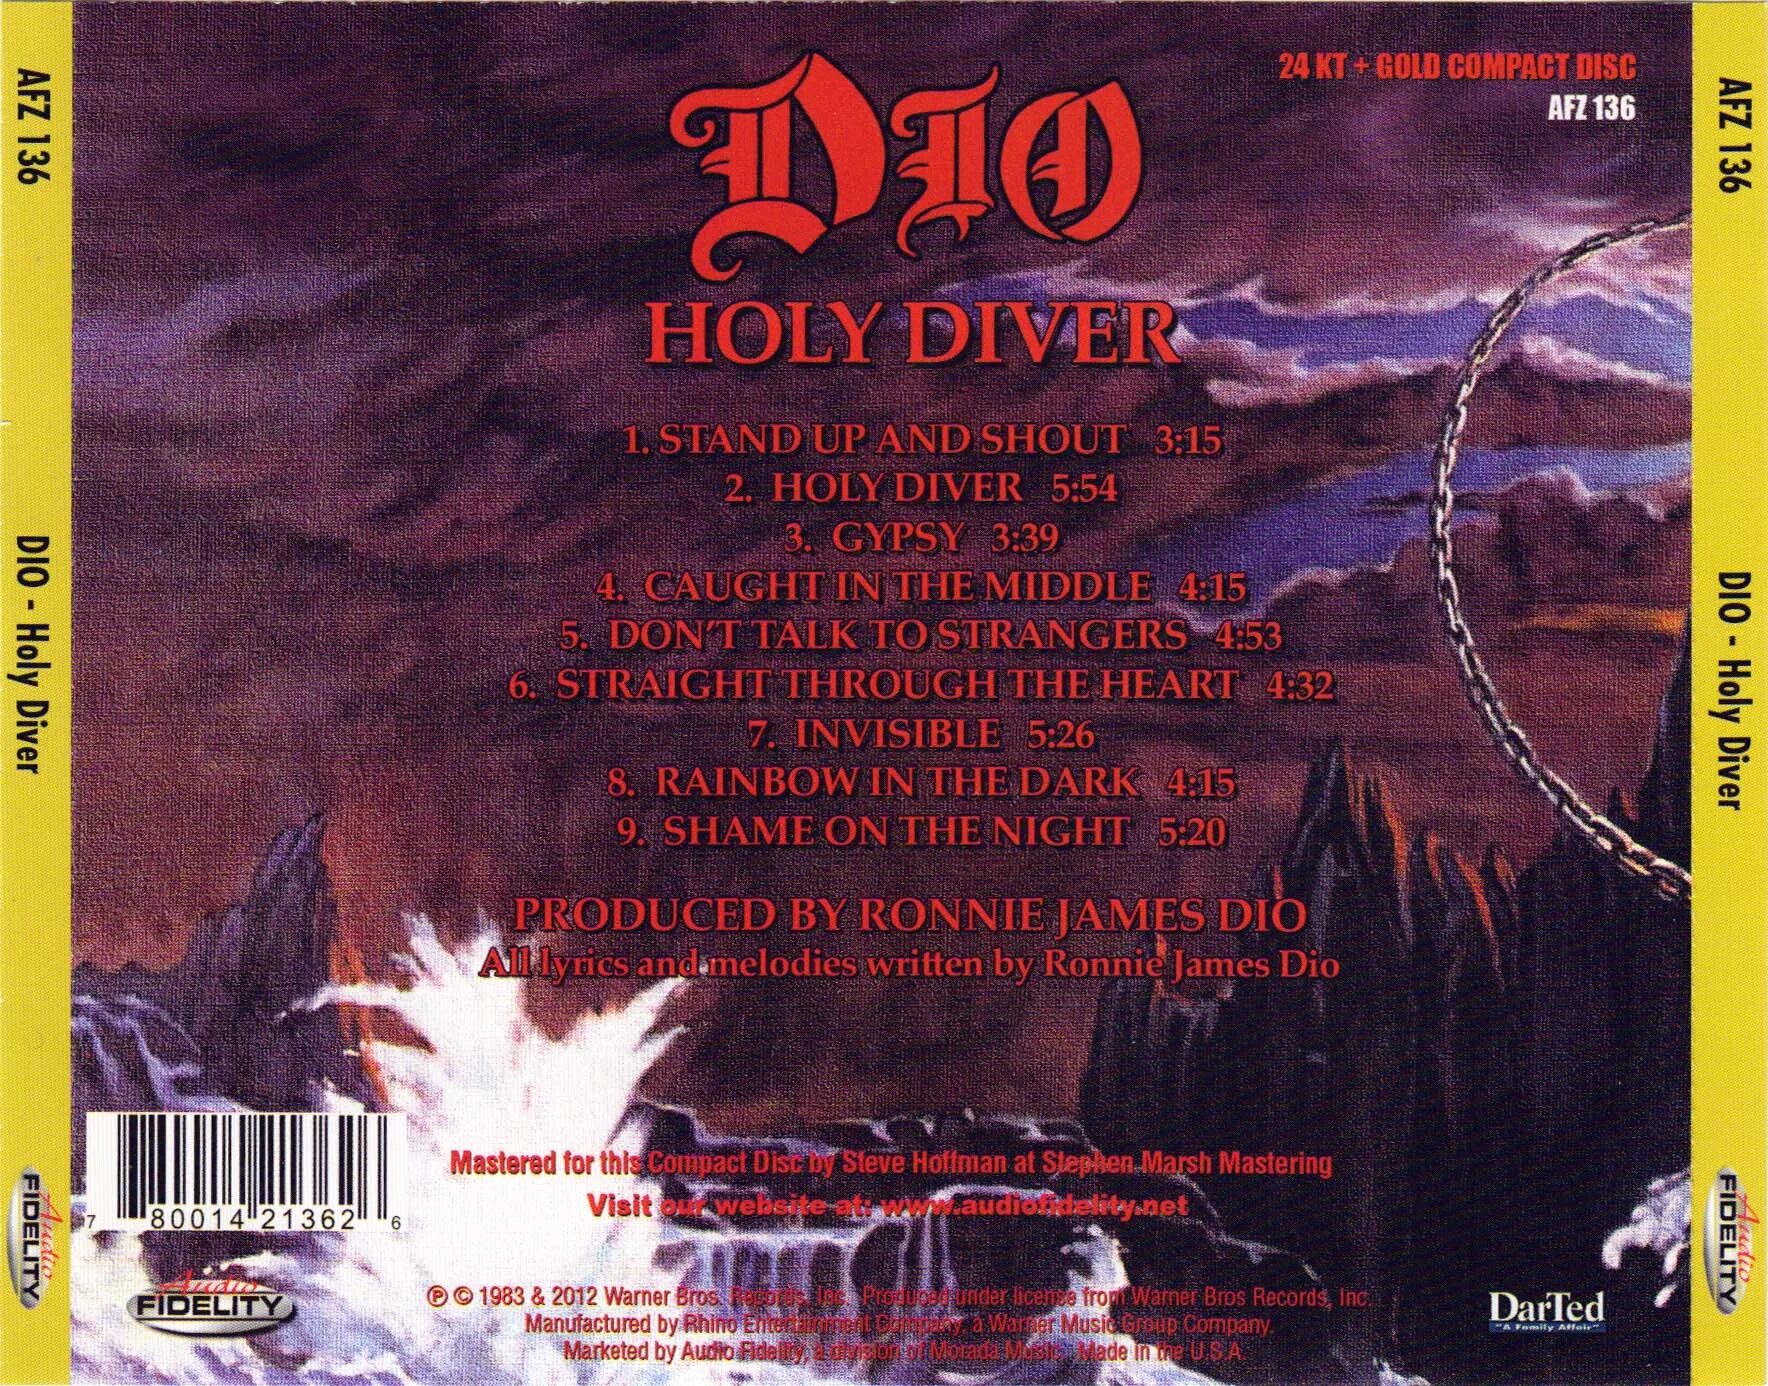 Dio текст. Dio Band 1983. Dio - Holy Diver (1983) CD. Dio Holy Diver 1983 обложка. Дио Holy Diver альбом.